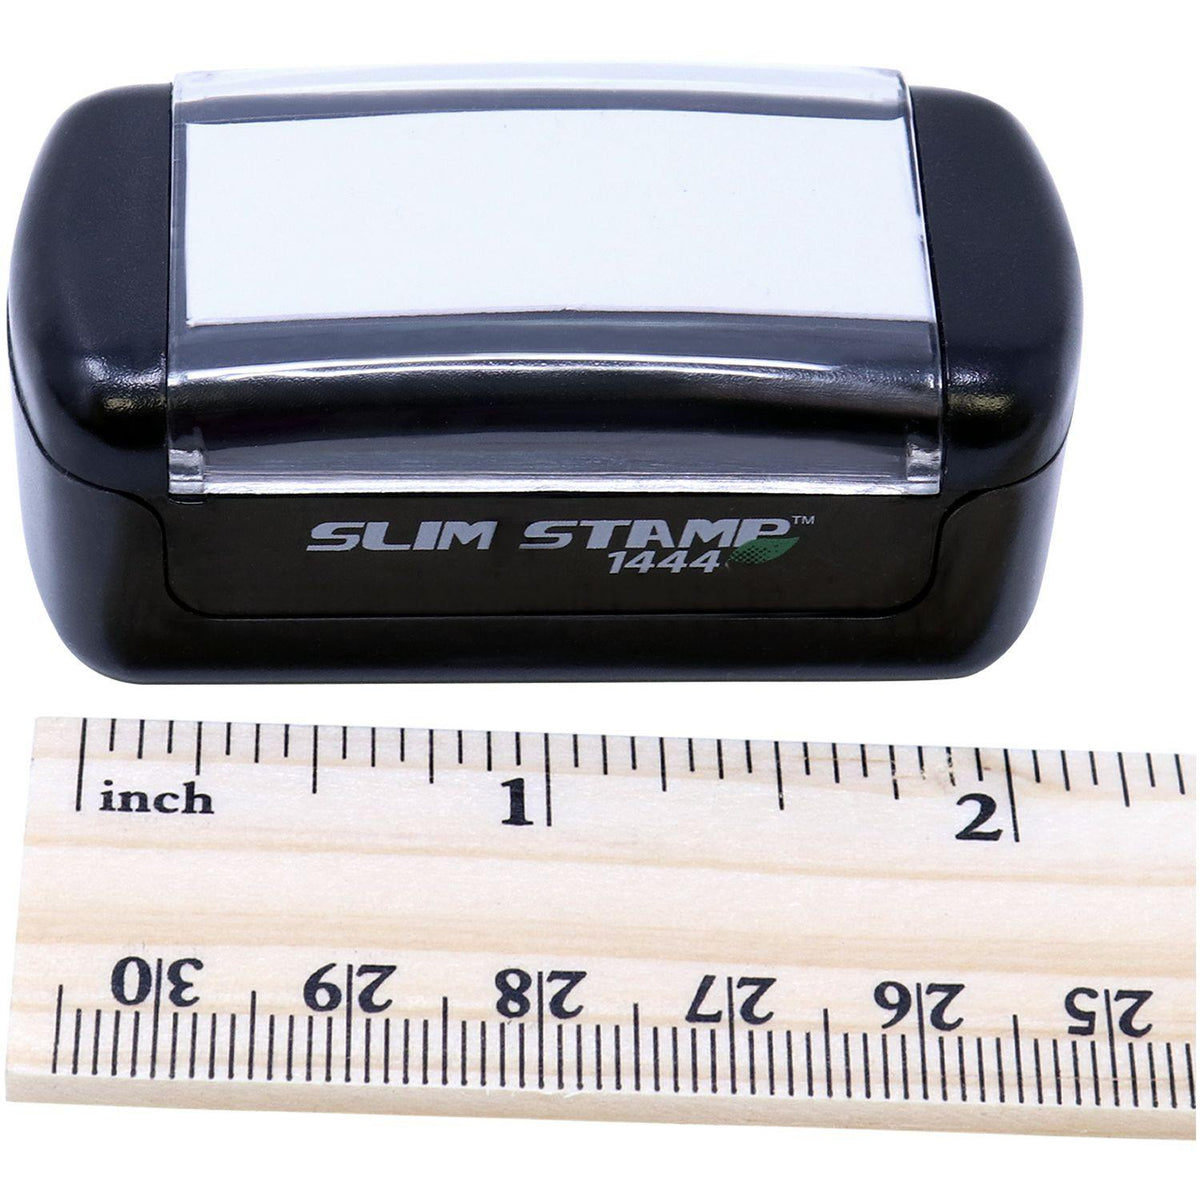 Slim Pre Inked Application Complete Stamp - Engineer Seal Stamps - Brand_Slim, Impression Size_Small, Stamp Type_Pre-Inked Stamp, Type of Use_Office, Type of Use_Professional